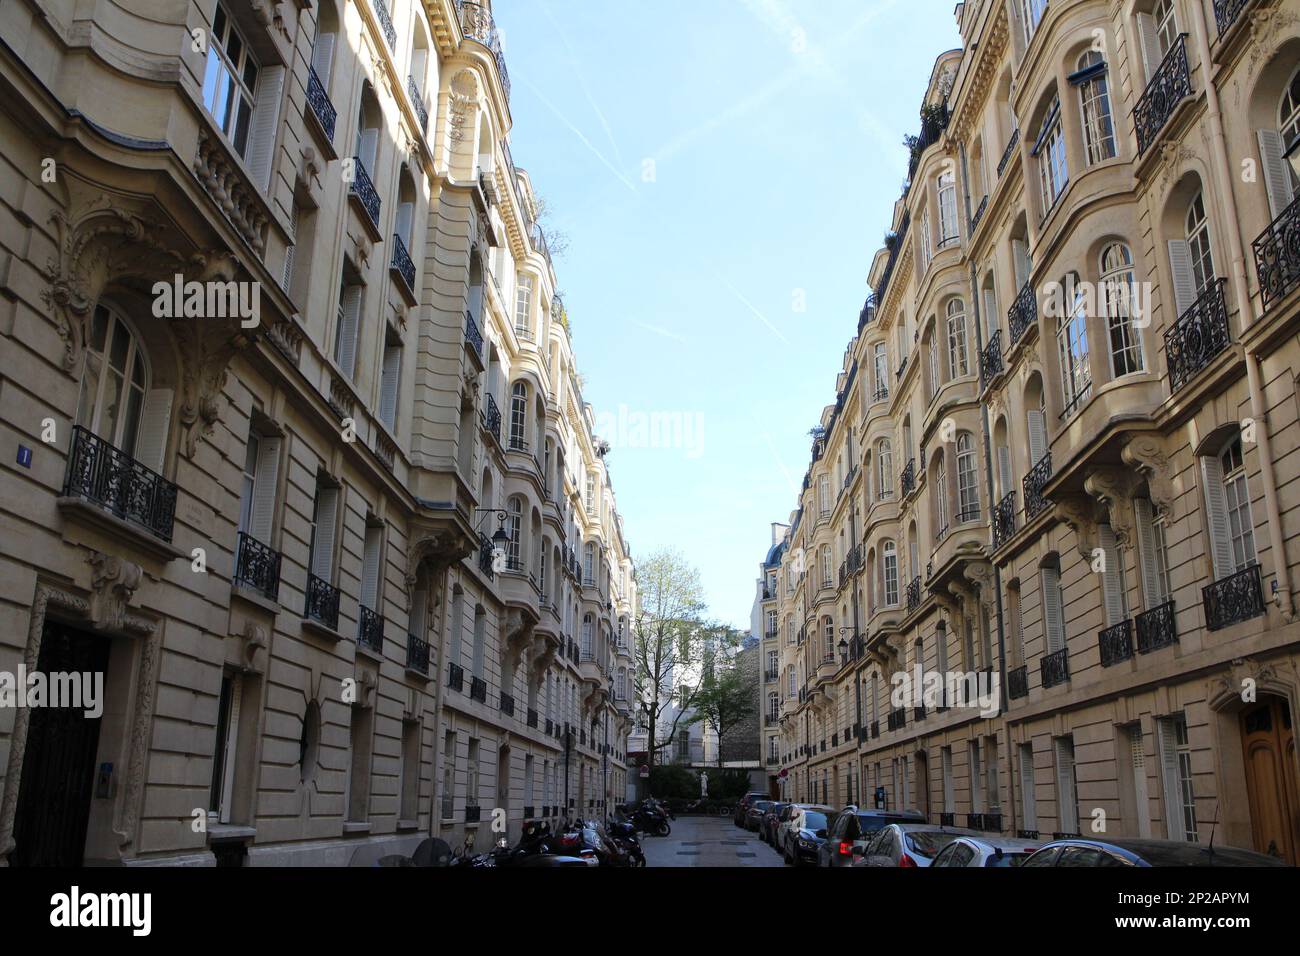 Residential area in Paris, France Stock Photo